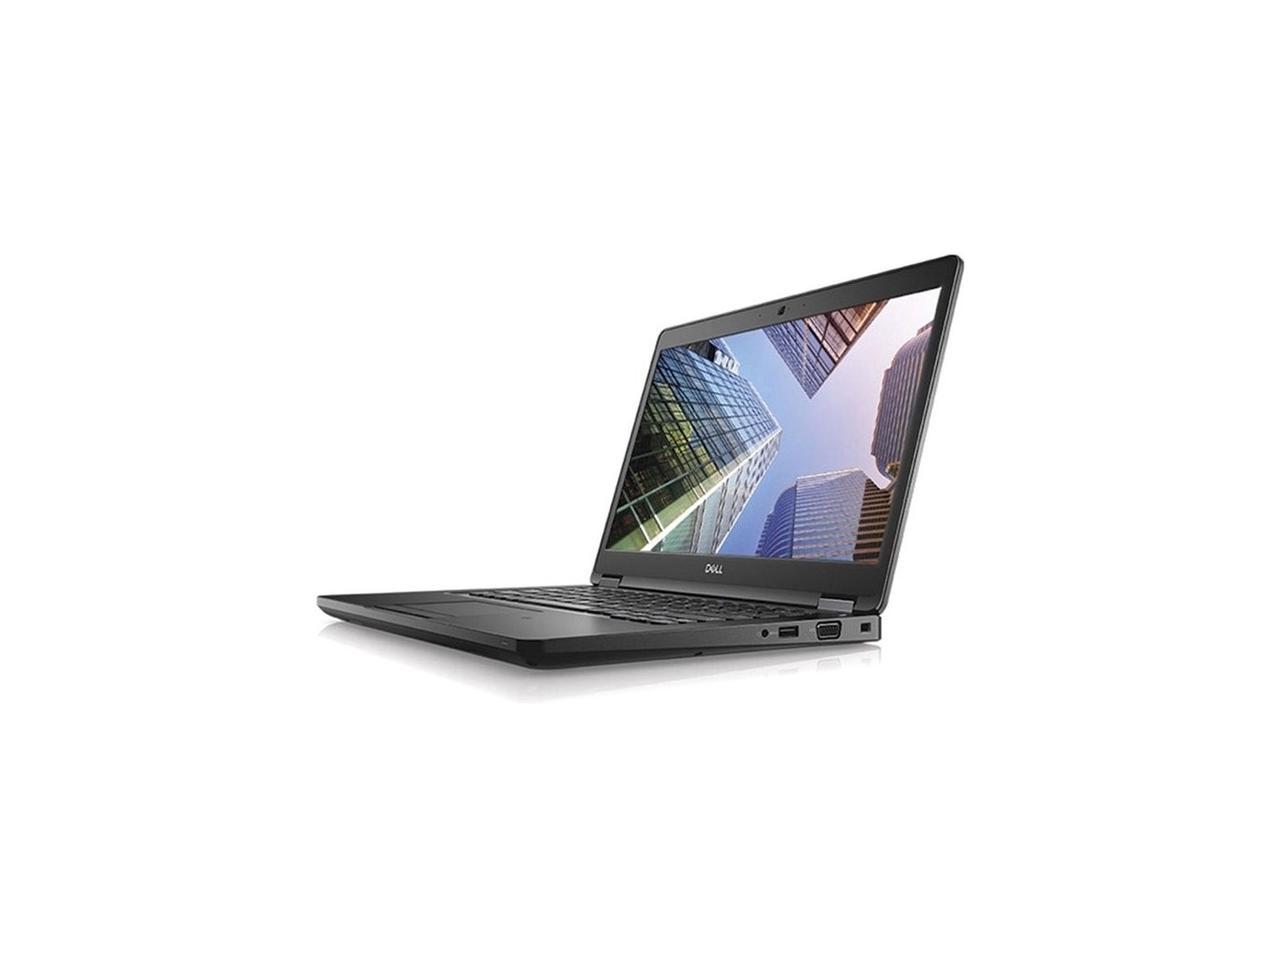 Used - Very Good: Dell Latitude 5590 15.6" LCD Notebook - Intel Core i7